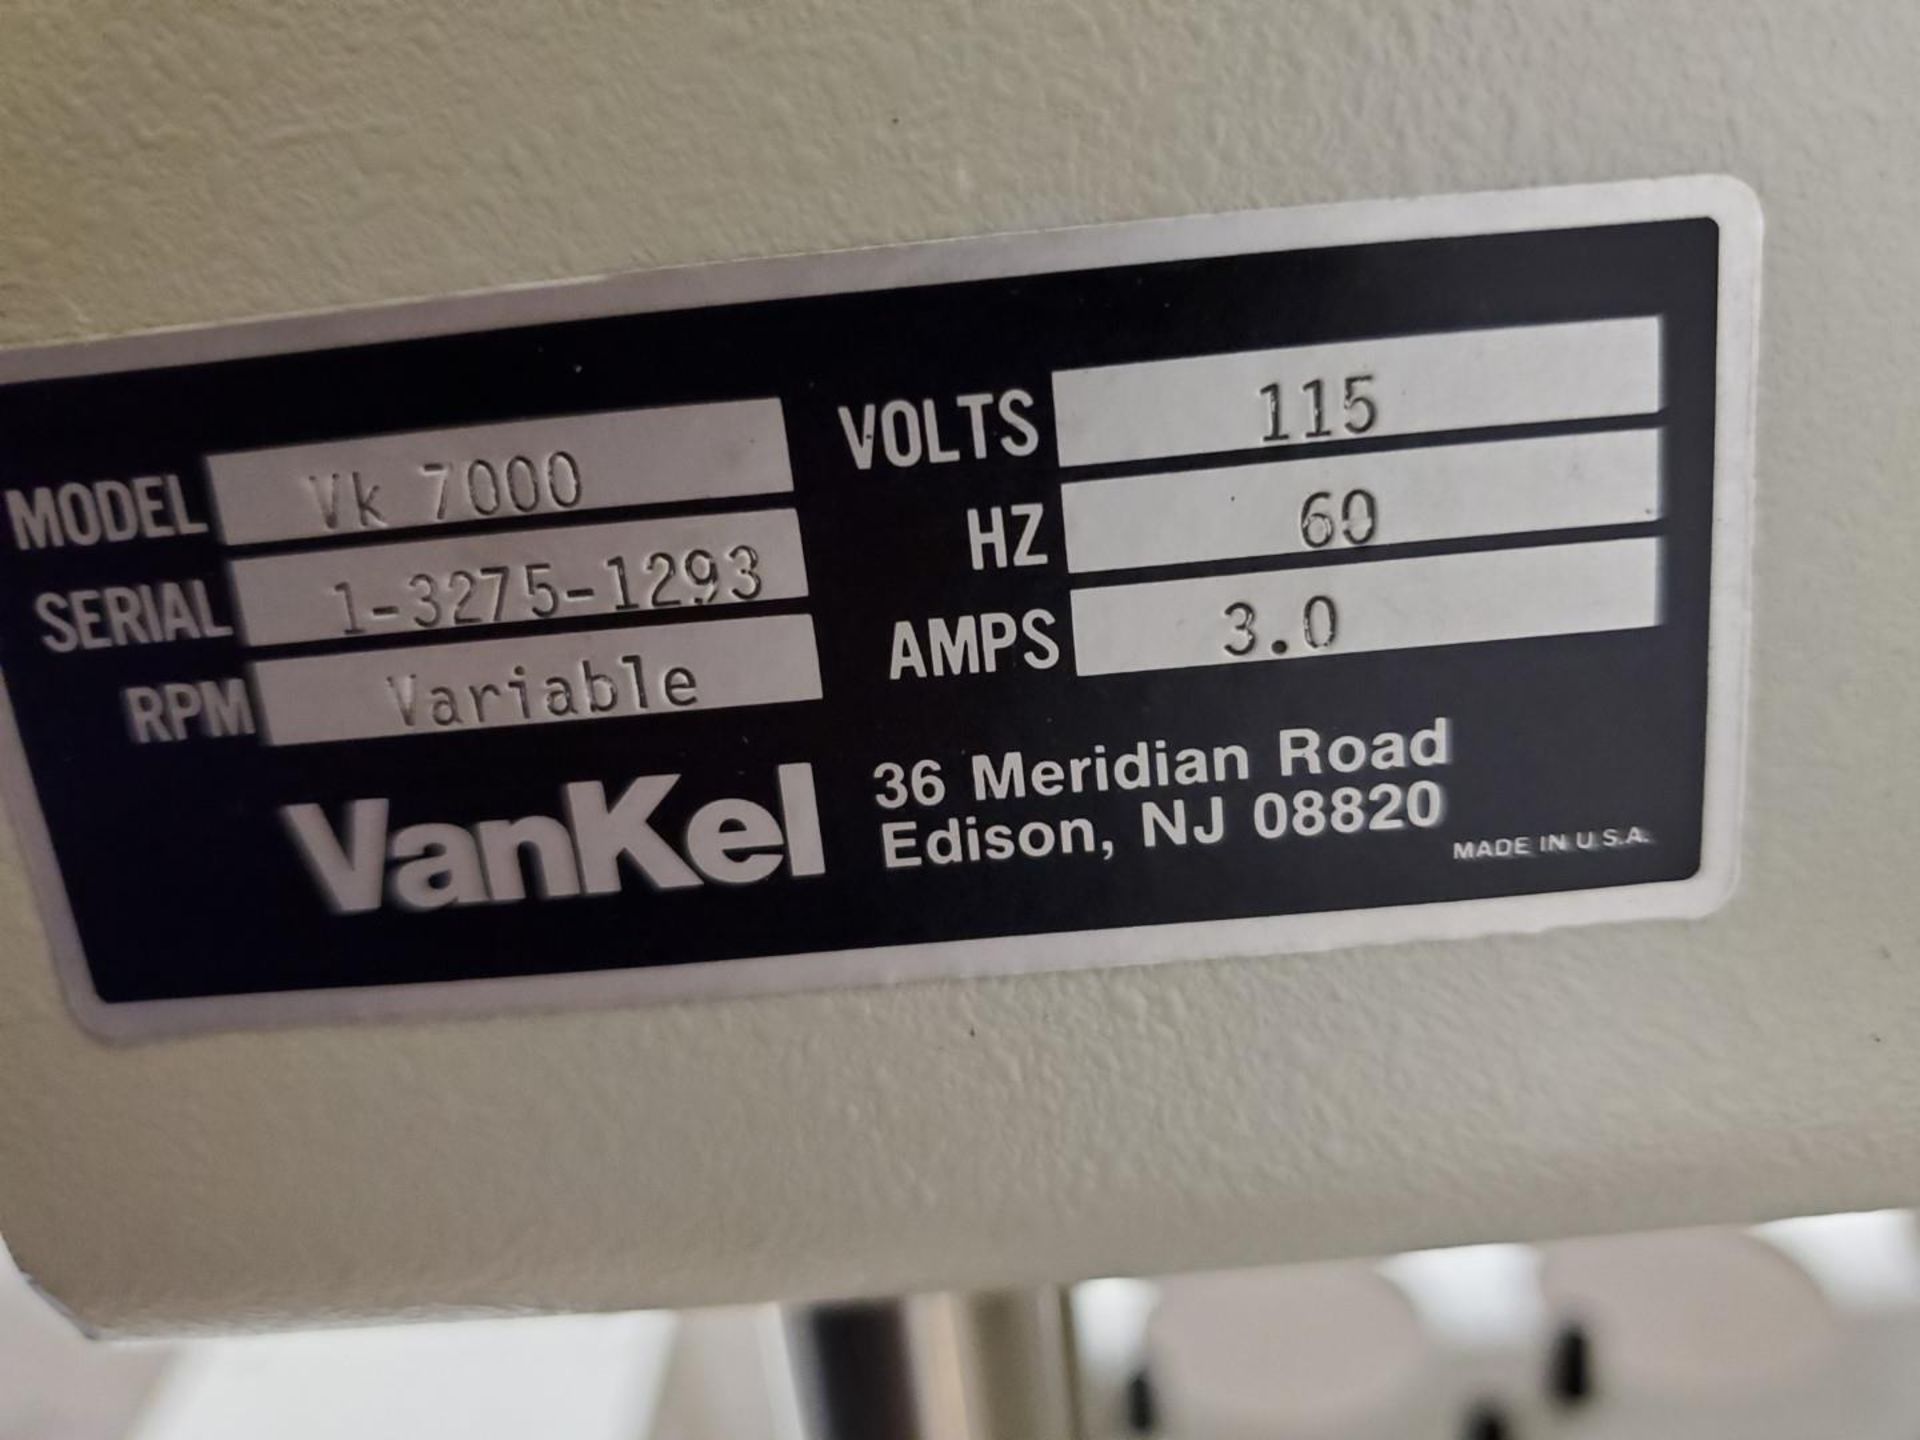 Vankel dissolution tester, model VK-7000, (6) station, with controls and built-in printer, including - Image 2 of 10